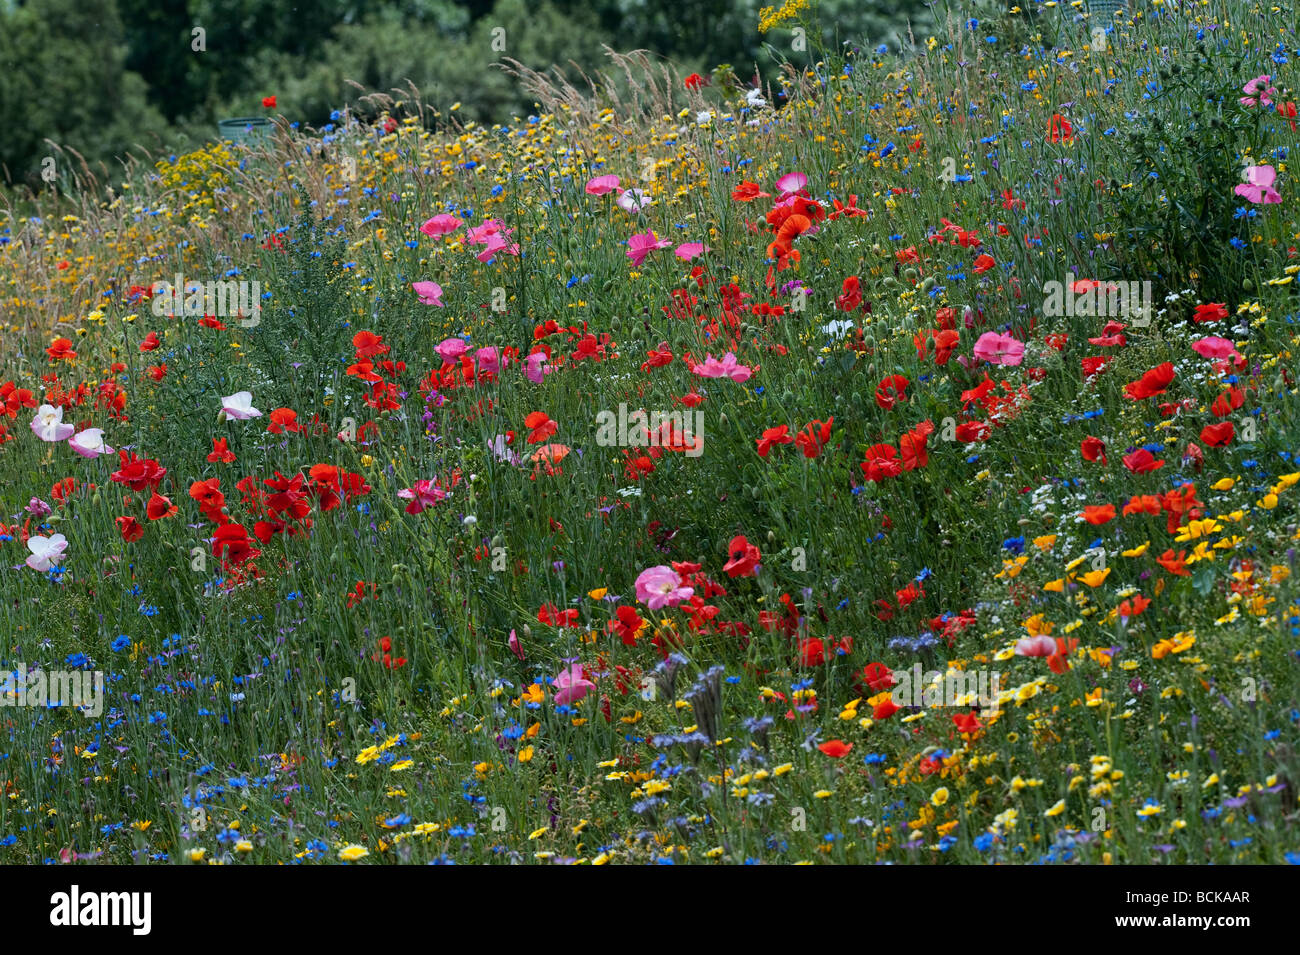 Wildflowers in the english countryside. England Stock Photo